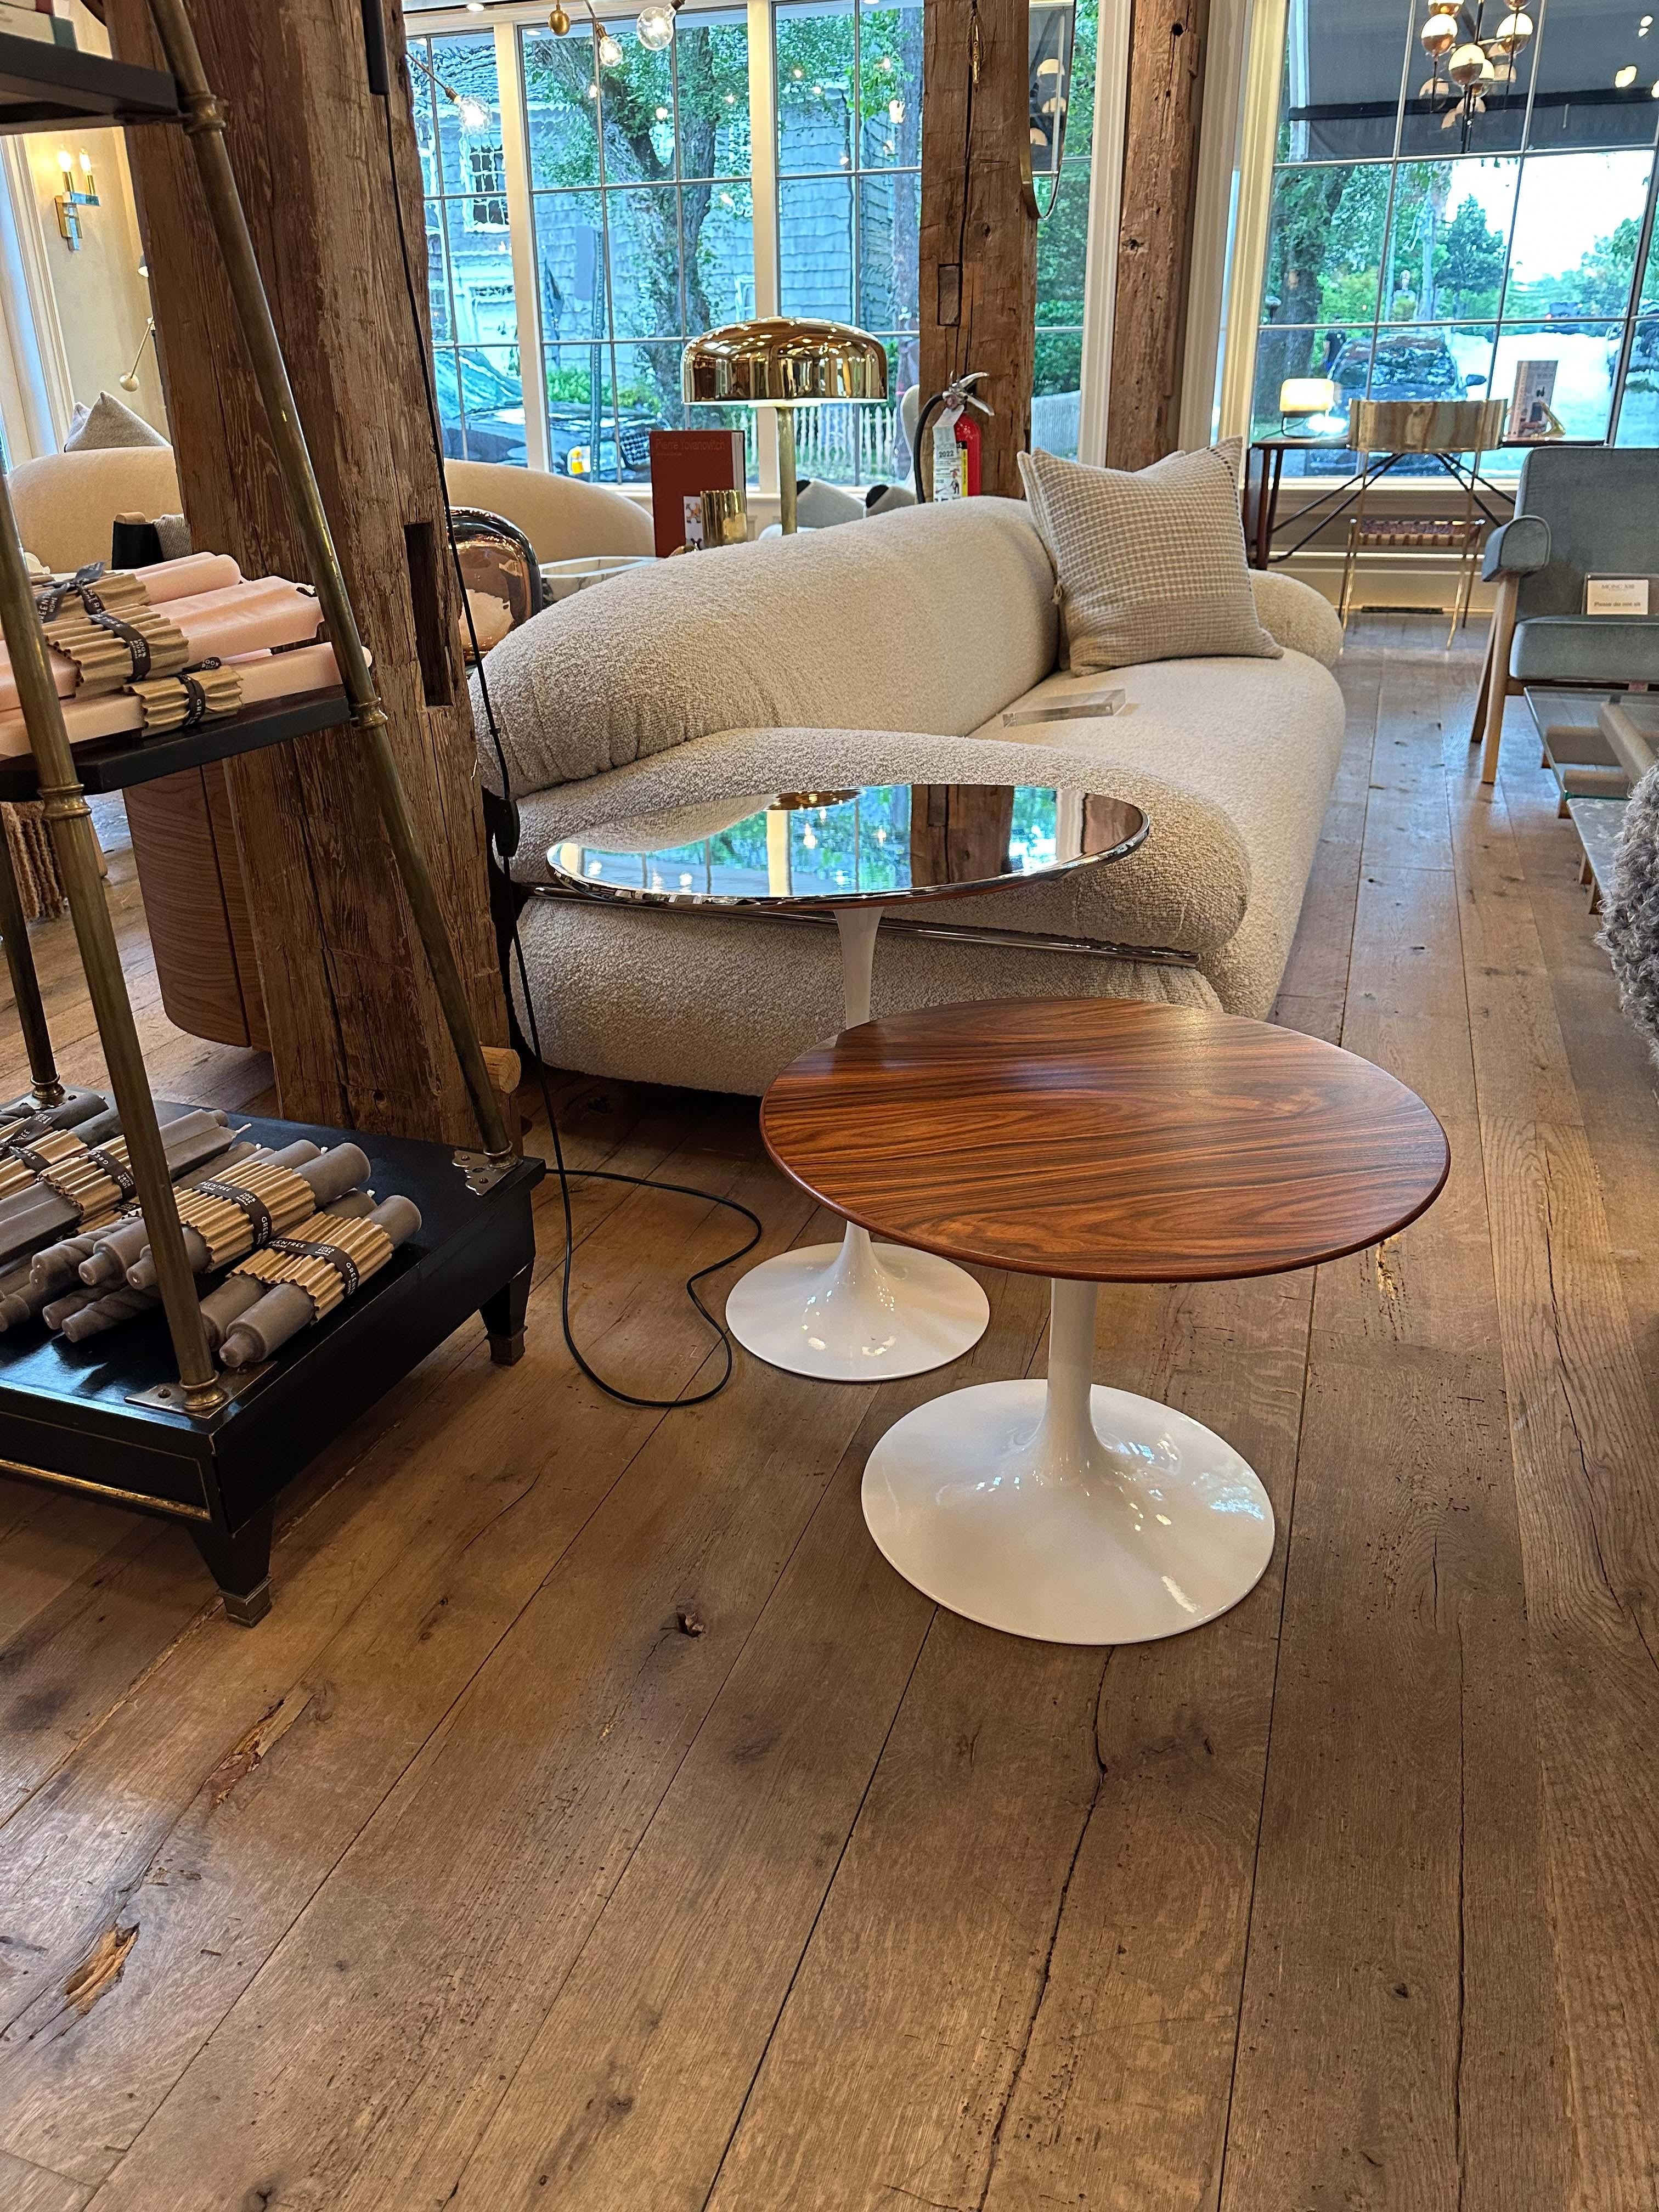 Experience timeless design with the Eero Saarinen Oval Side Table from Knoll. Featuring a seamless, organic form with a rosewood and white base, this iconic side table enhances any room's style and appeal. Expertly-crafted to highest quality